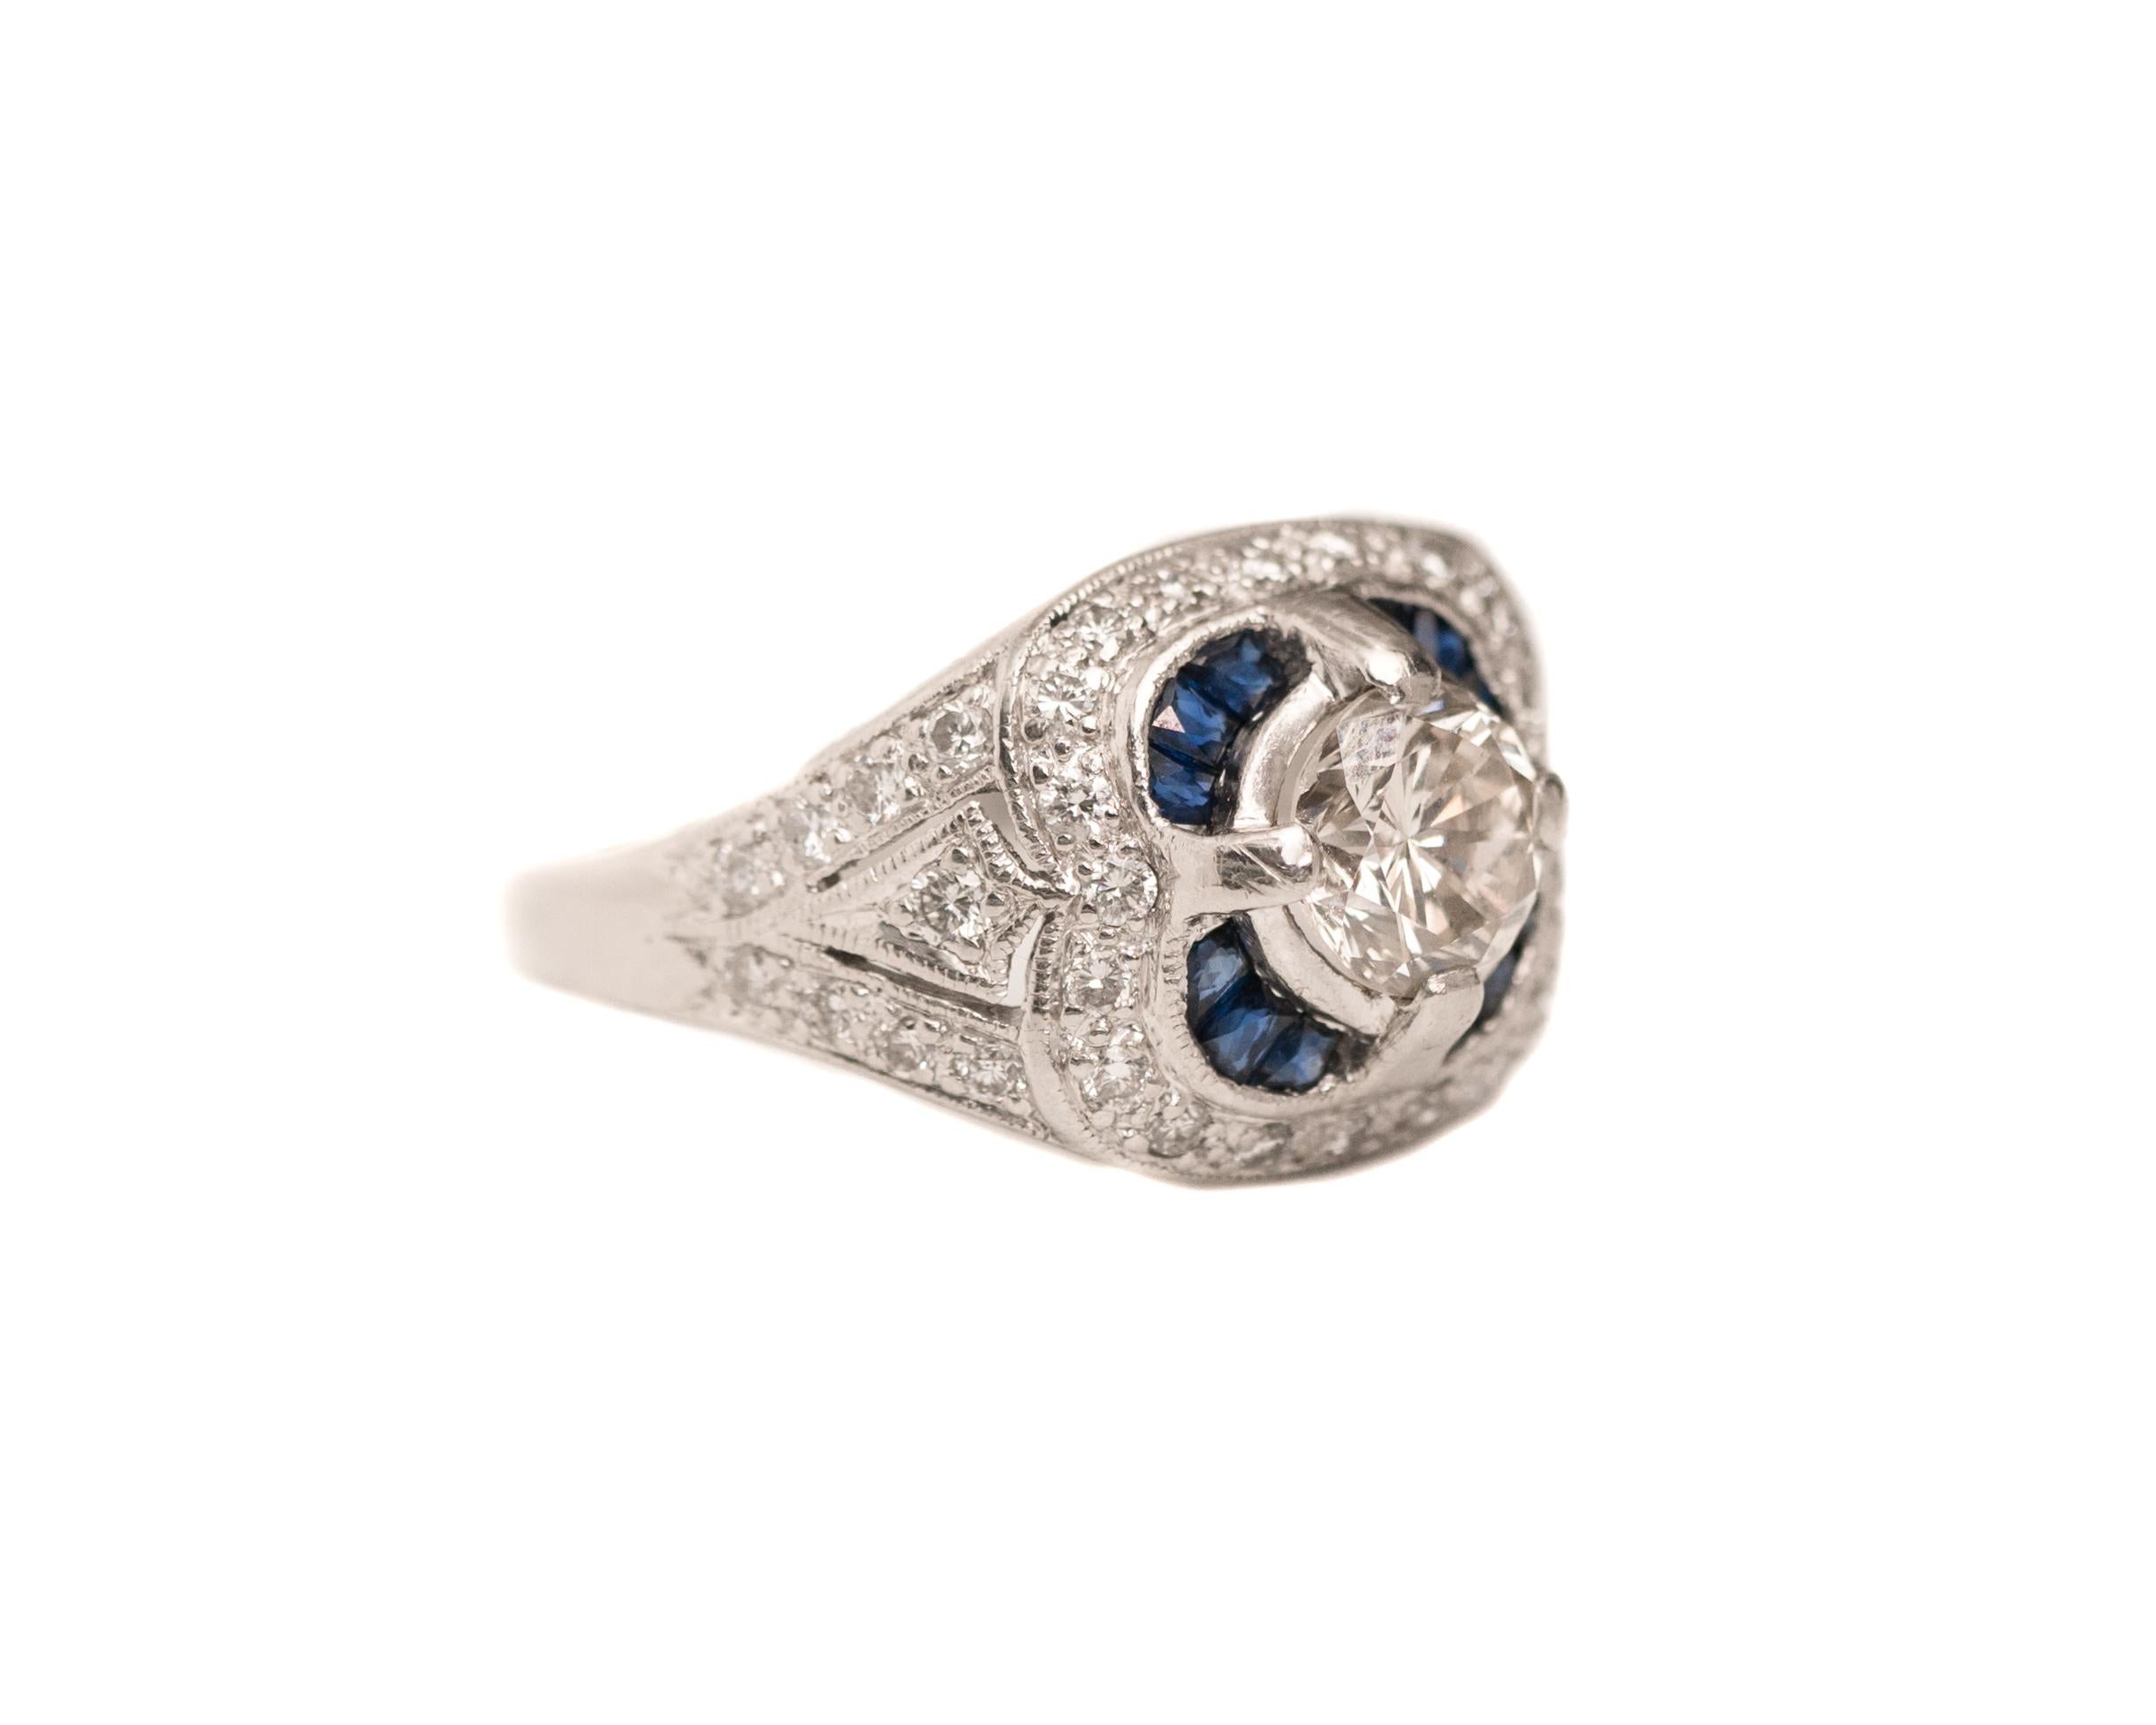 Introducing Hannah
Hannah is a new ring with an old soul. Pulling many design elements from our favorite period pieces, Hannah has the best of both worlds. Classic beauty with a splash of colorful personality... What's not to love?

Fine details